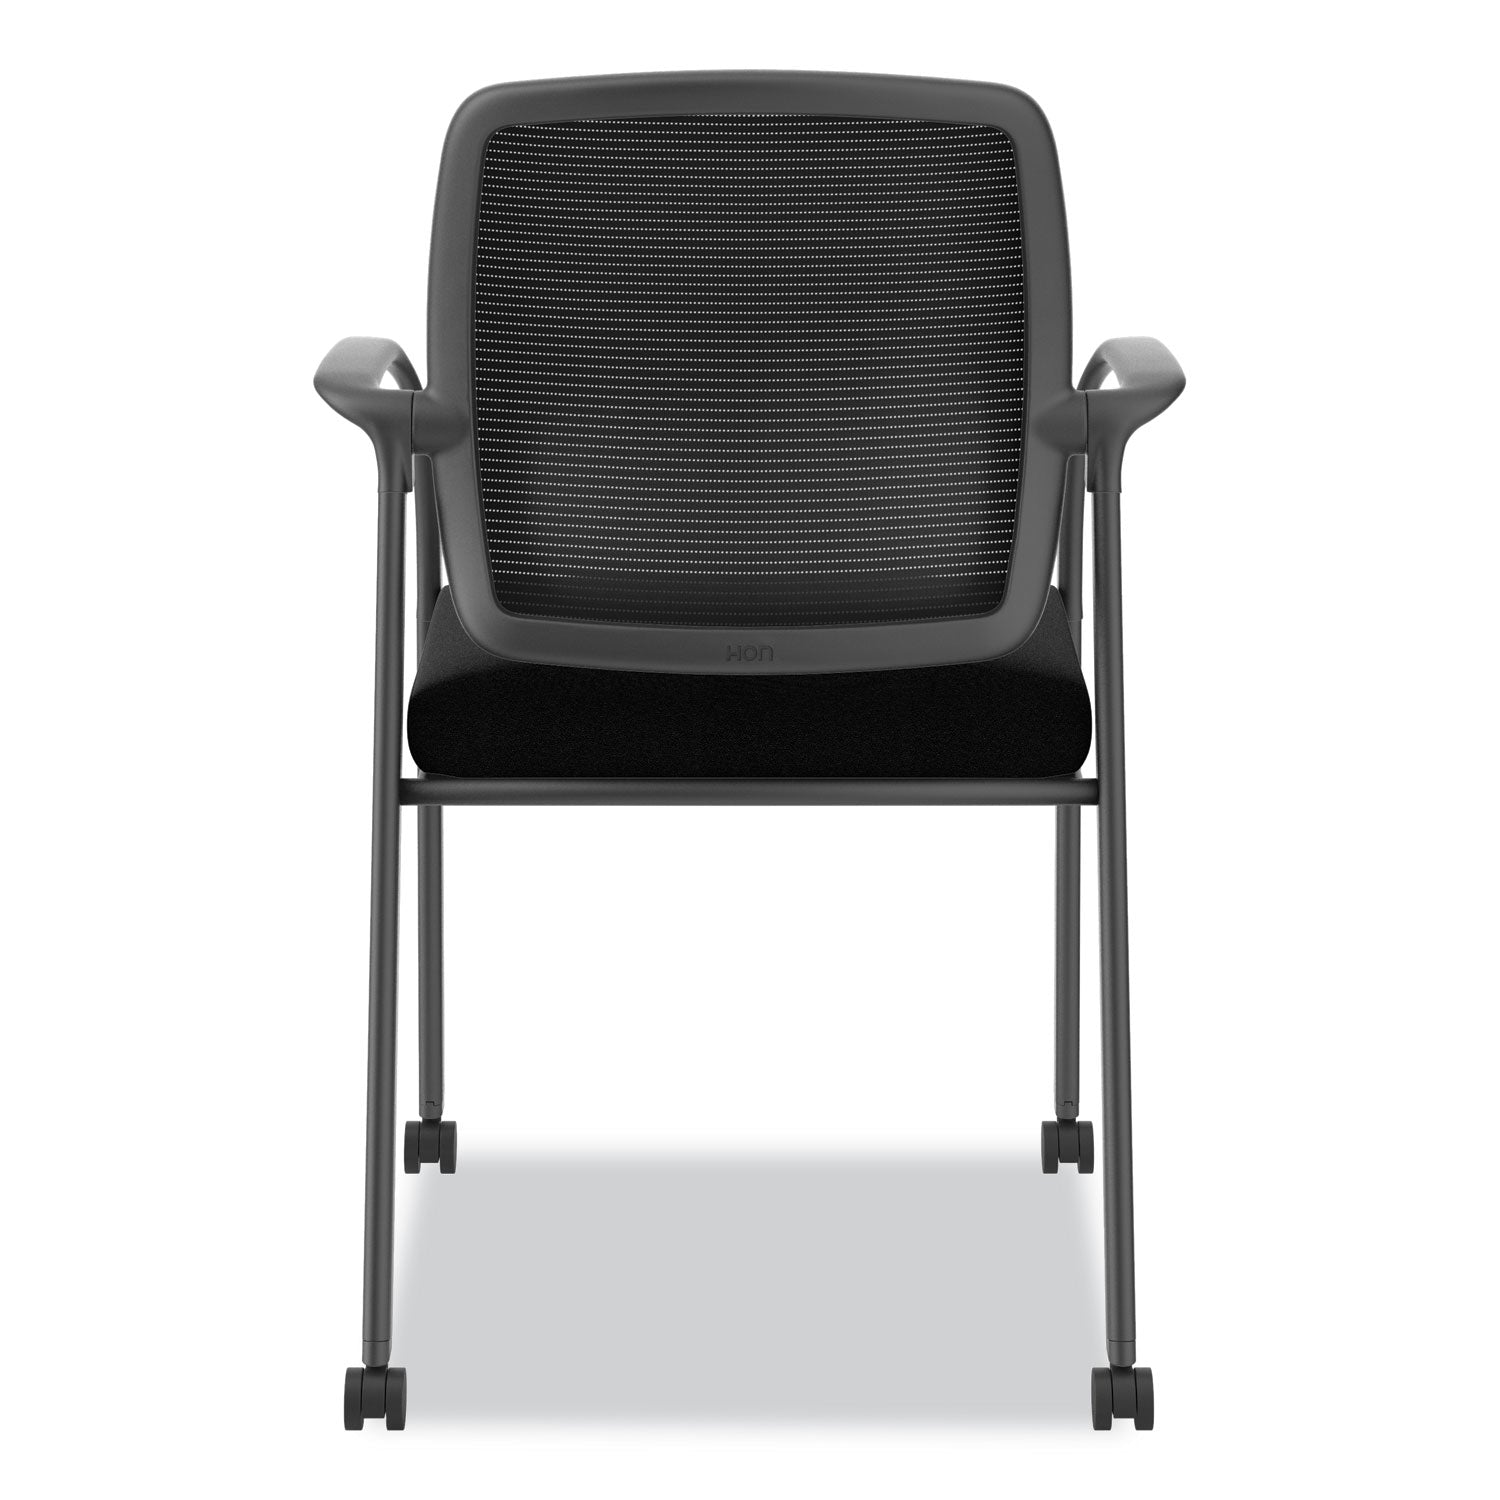 nucleus-series-recharge-guest-chair-supports-up-to-300-lb-1762-seat-height-black-seat-back-black-base_honnr6fmc10p71 - 5